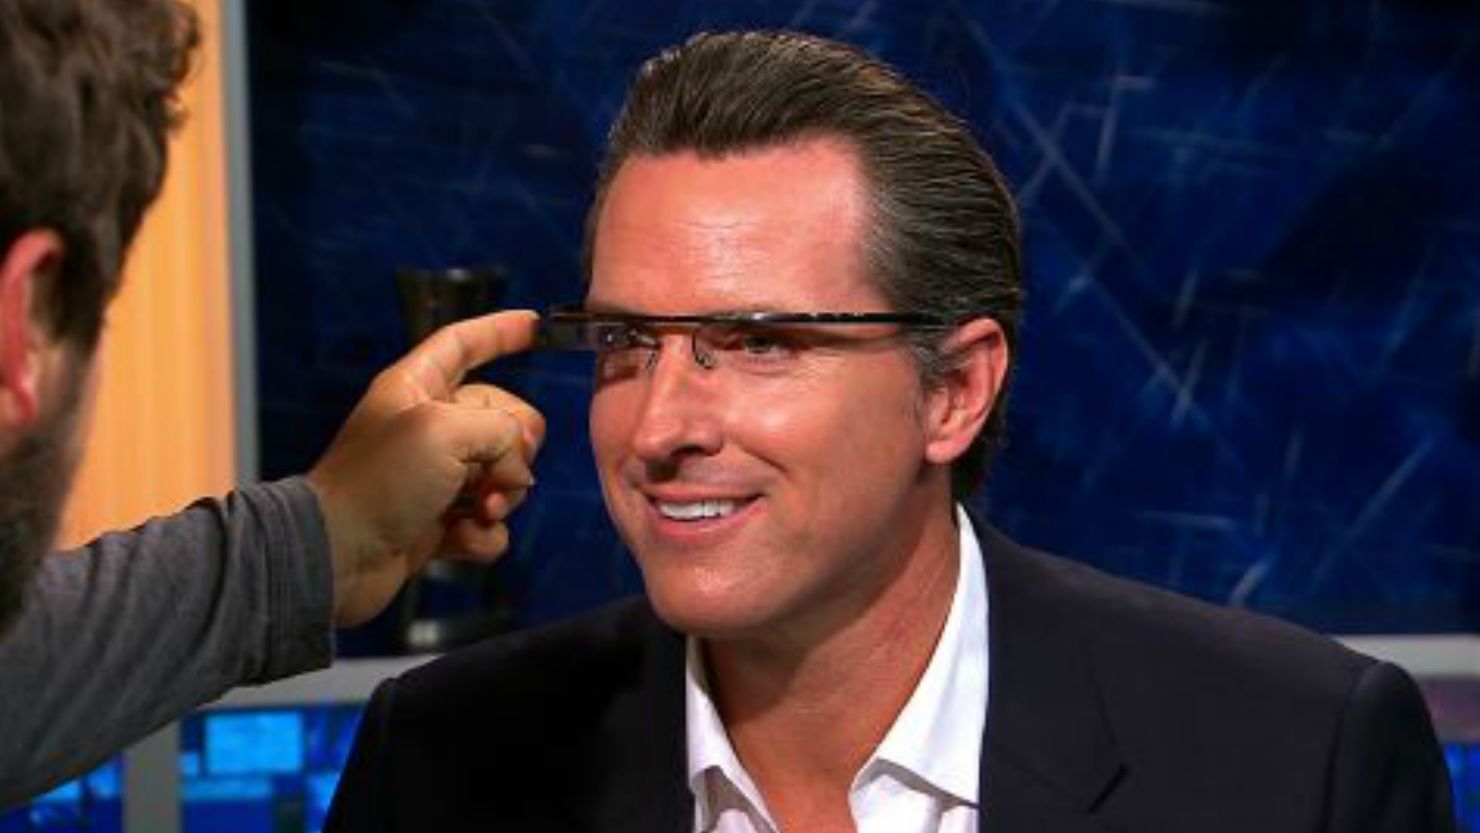 Gavin Newsom tries Google's augmented reality glasses on Current TV.